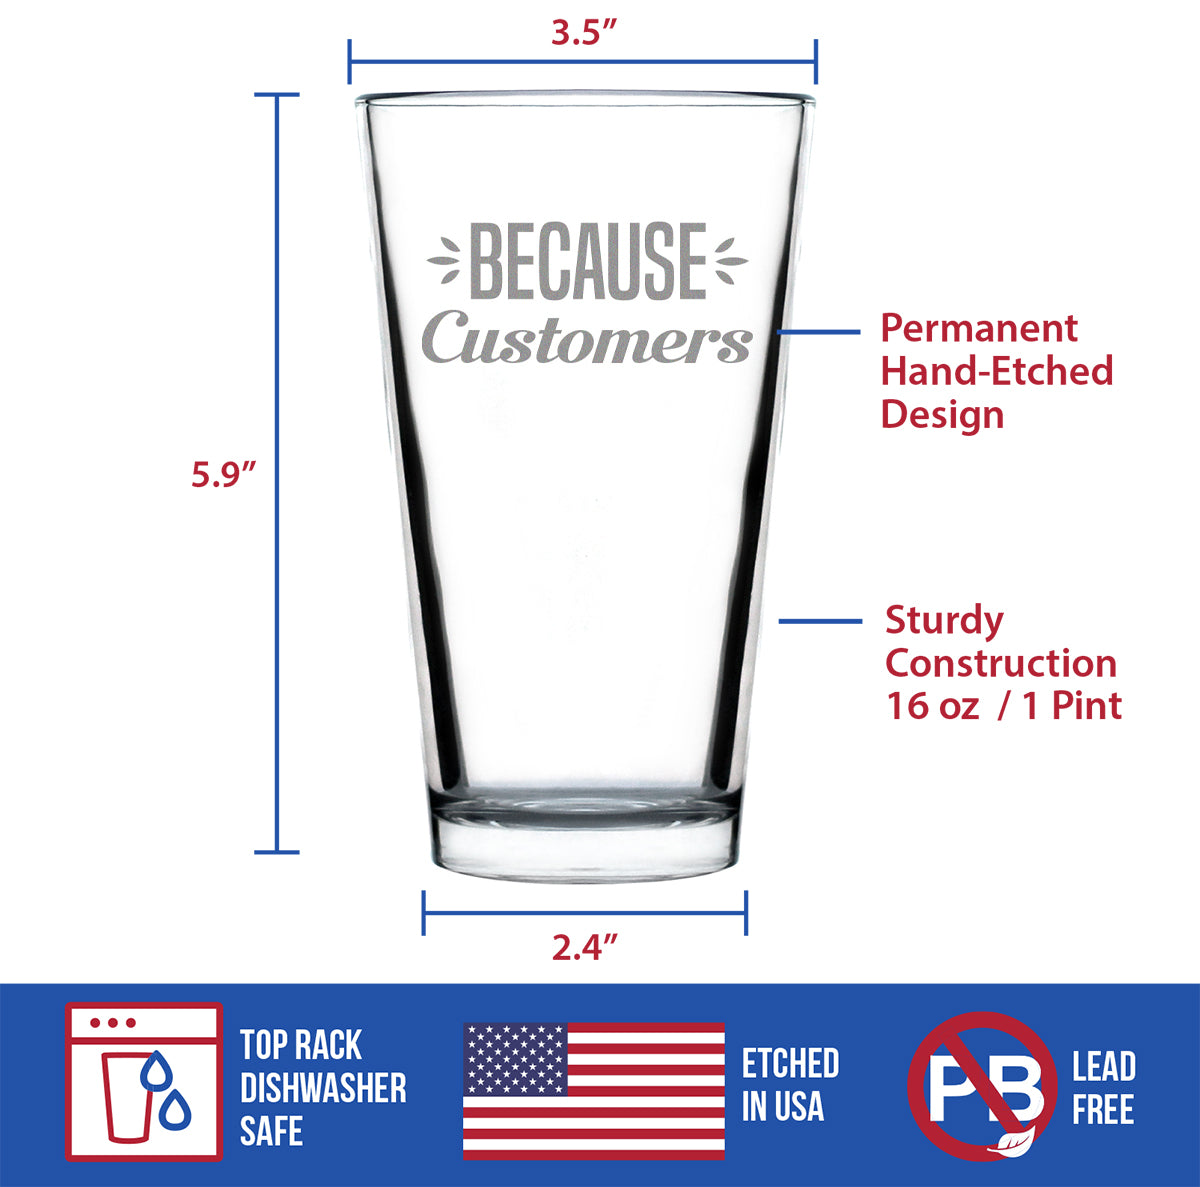 Because Customers Cute Funny Pint Glass 16 Oz, Etched Sayings, Gift for Coworkers and Bosses